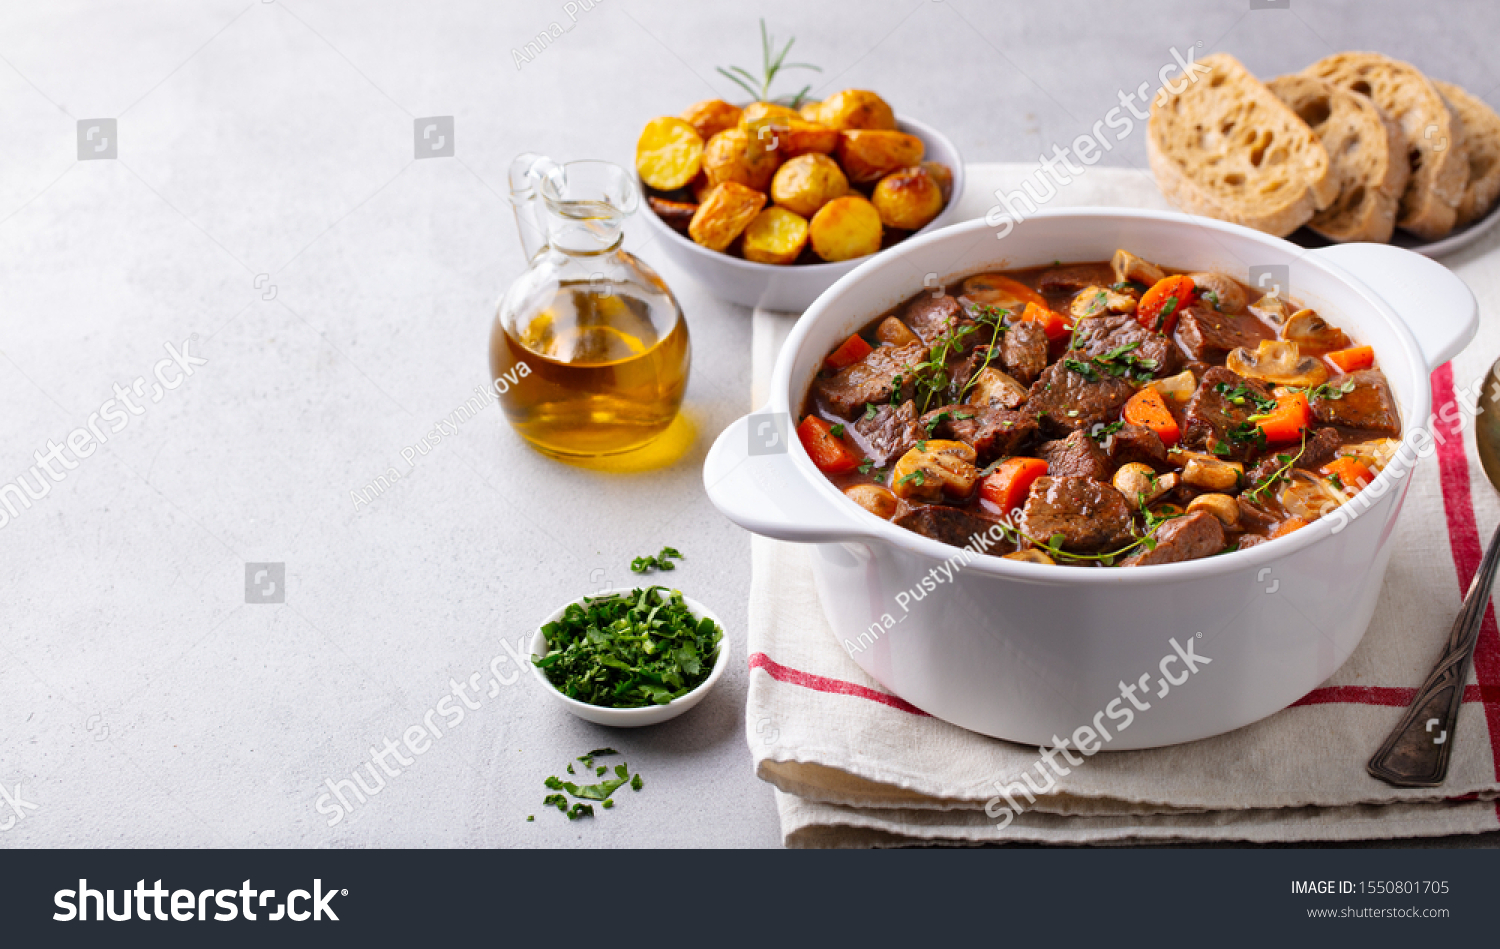 Beef bourguignon stew with vegetables. Grey background. Copy space. #1550801705